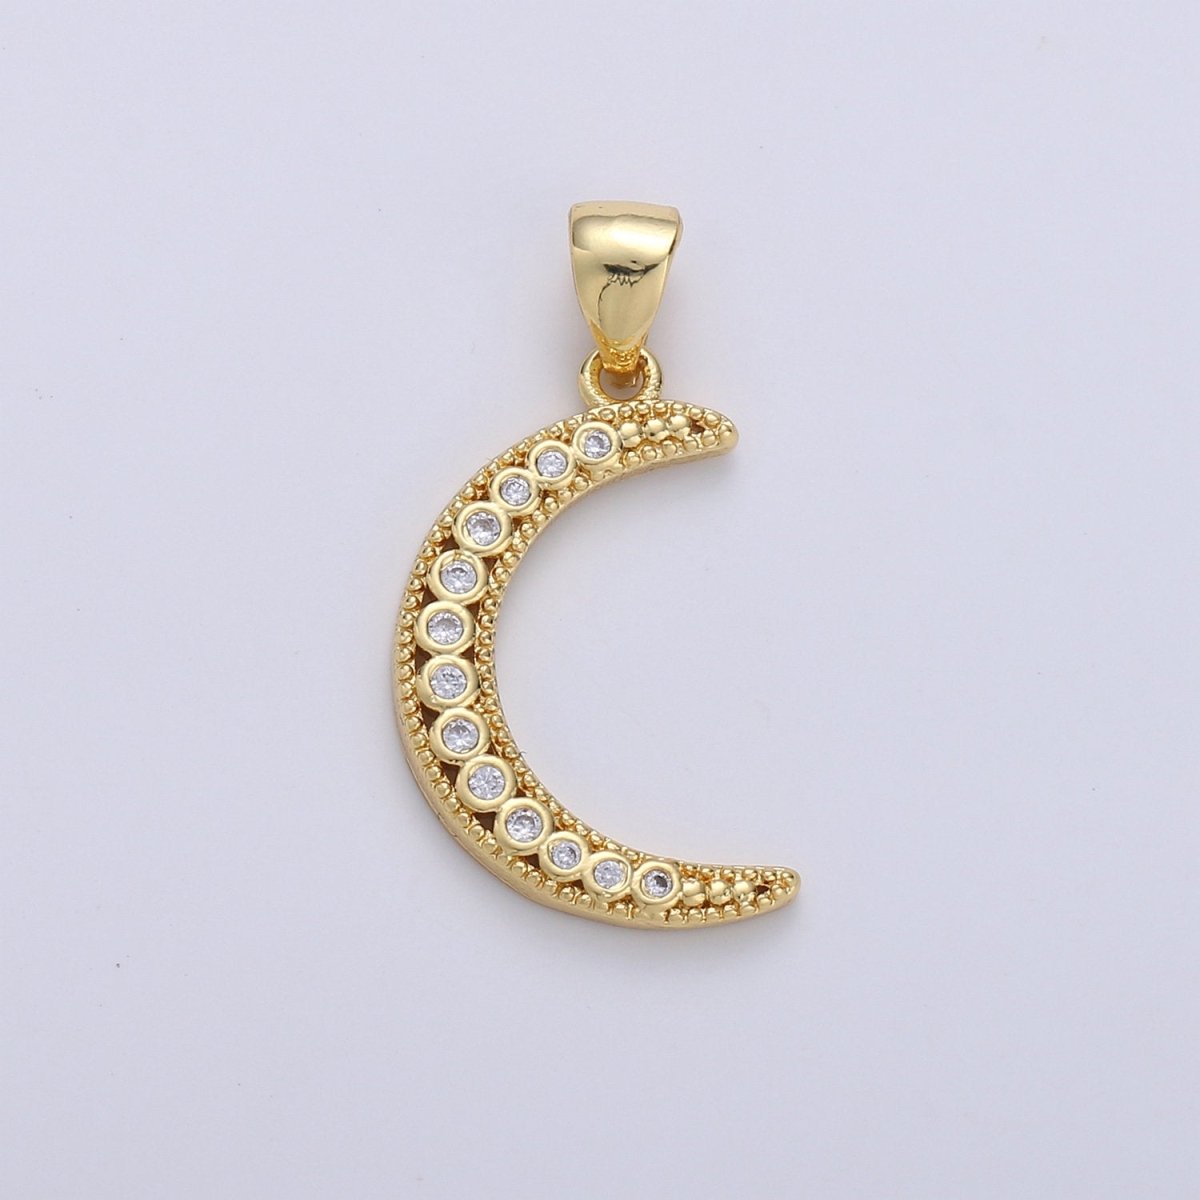 24k Gold Filled Micro Pave Moon Charm, Cubic Zirconia Crescent Moon Pendant Charm, Gold Filled Charm, For DIY Jewelry D-252 - DLUXCA